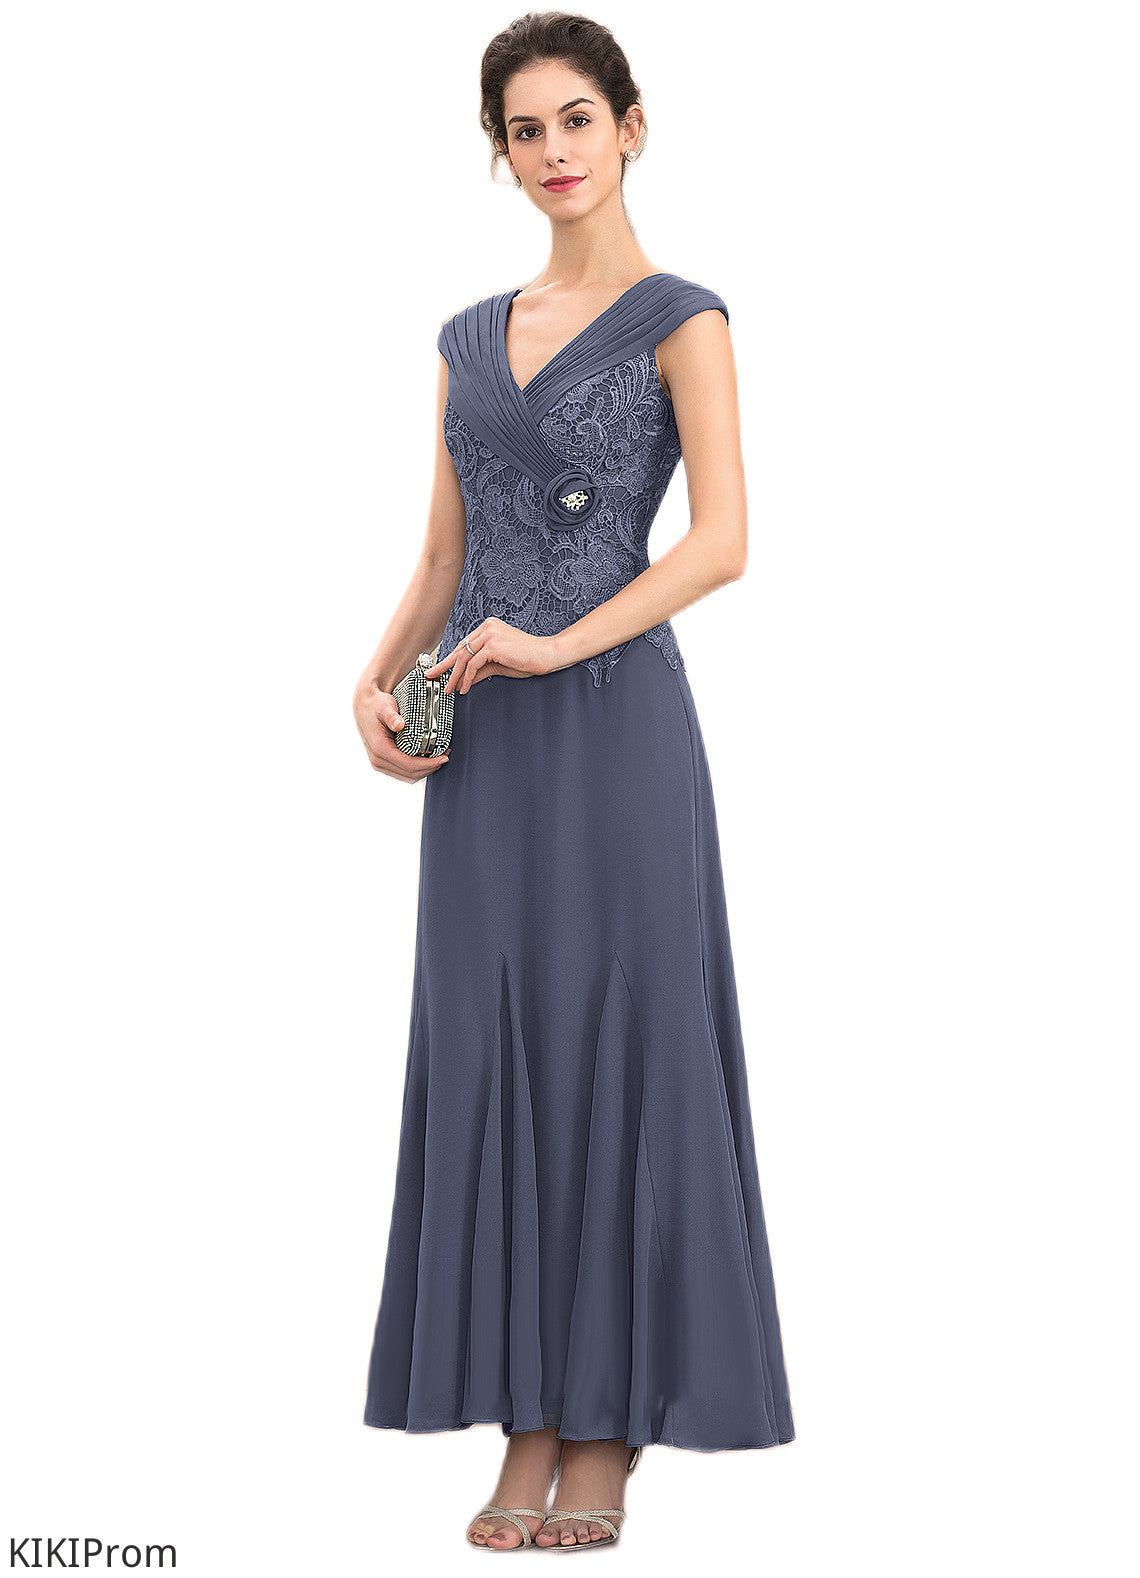 Nicky A-Line V-neck Ankle-Length Chiffon Lace Mother of the Bride Dress With Ruffle Beading DZ126P0014971